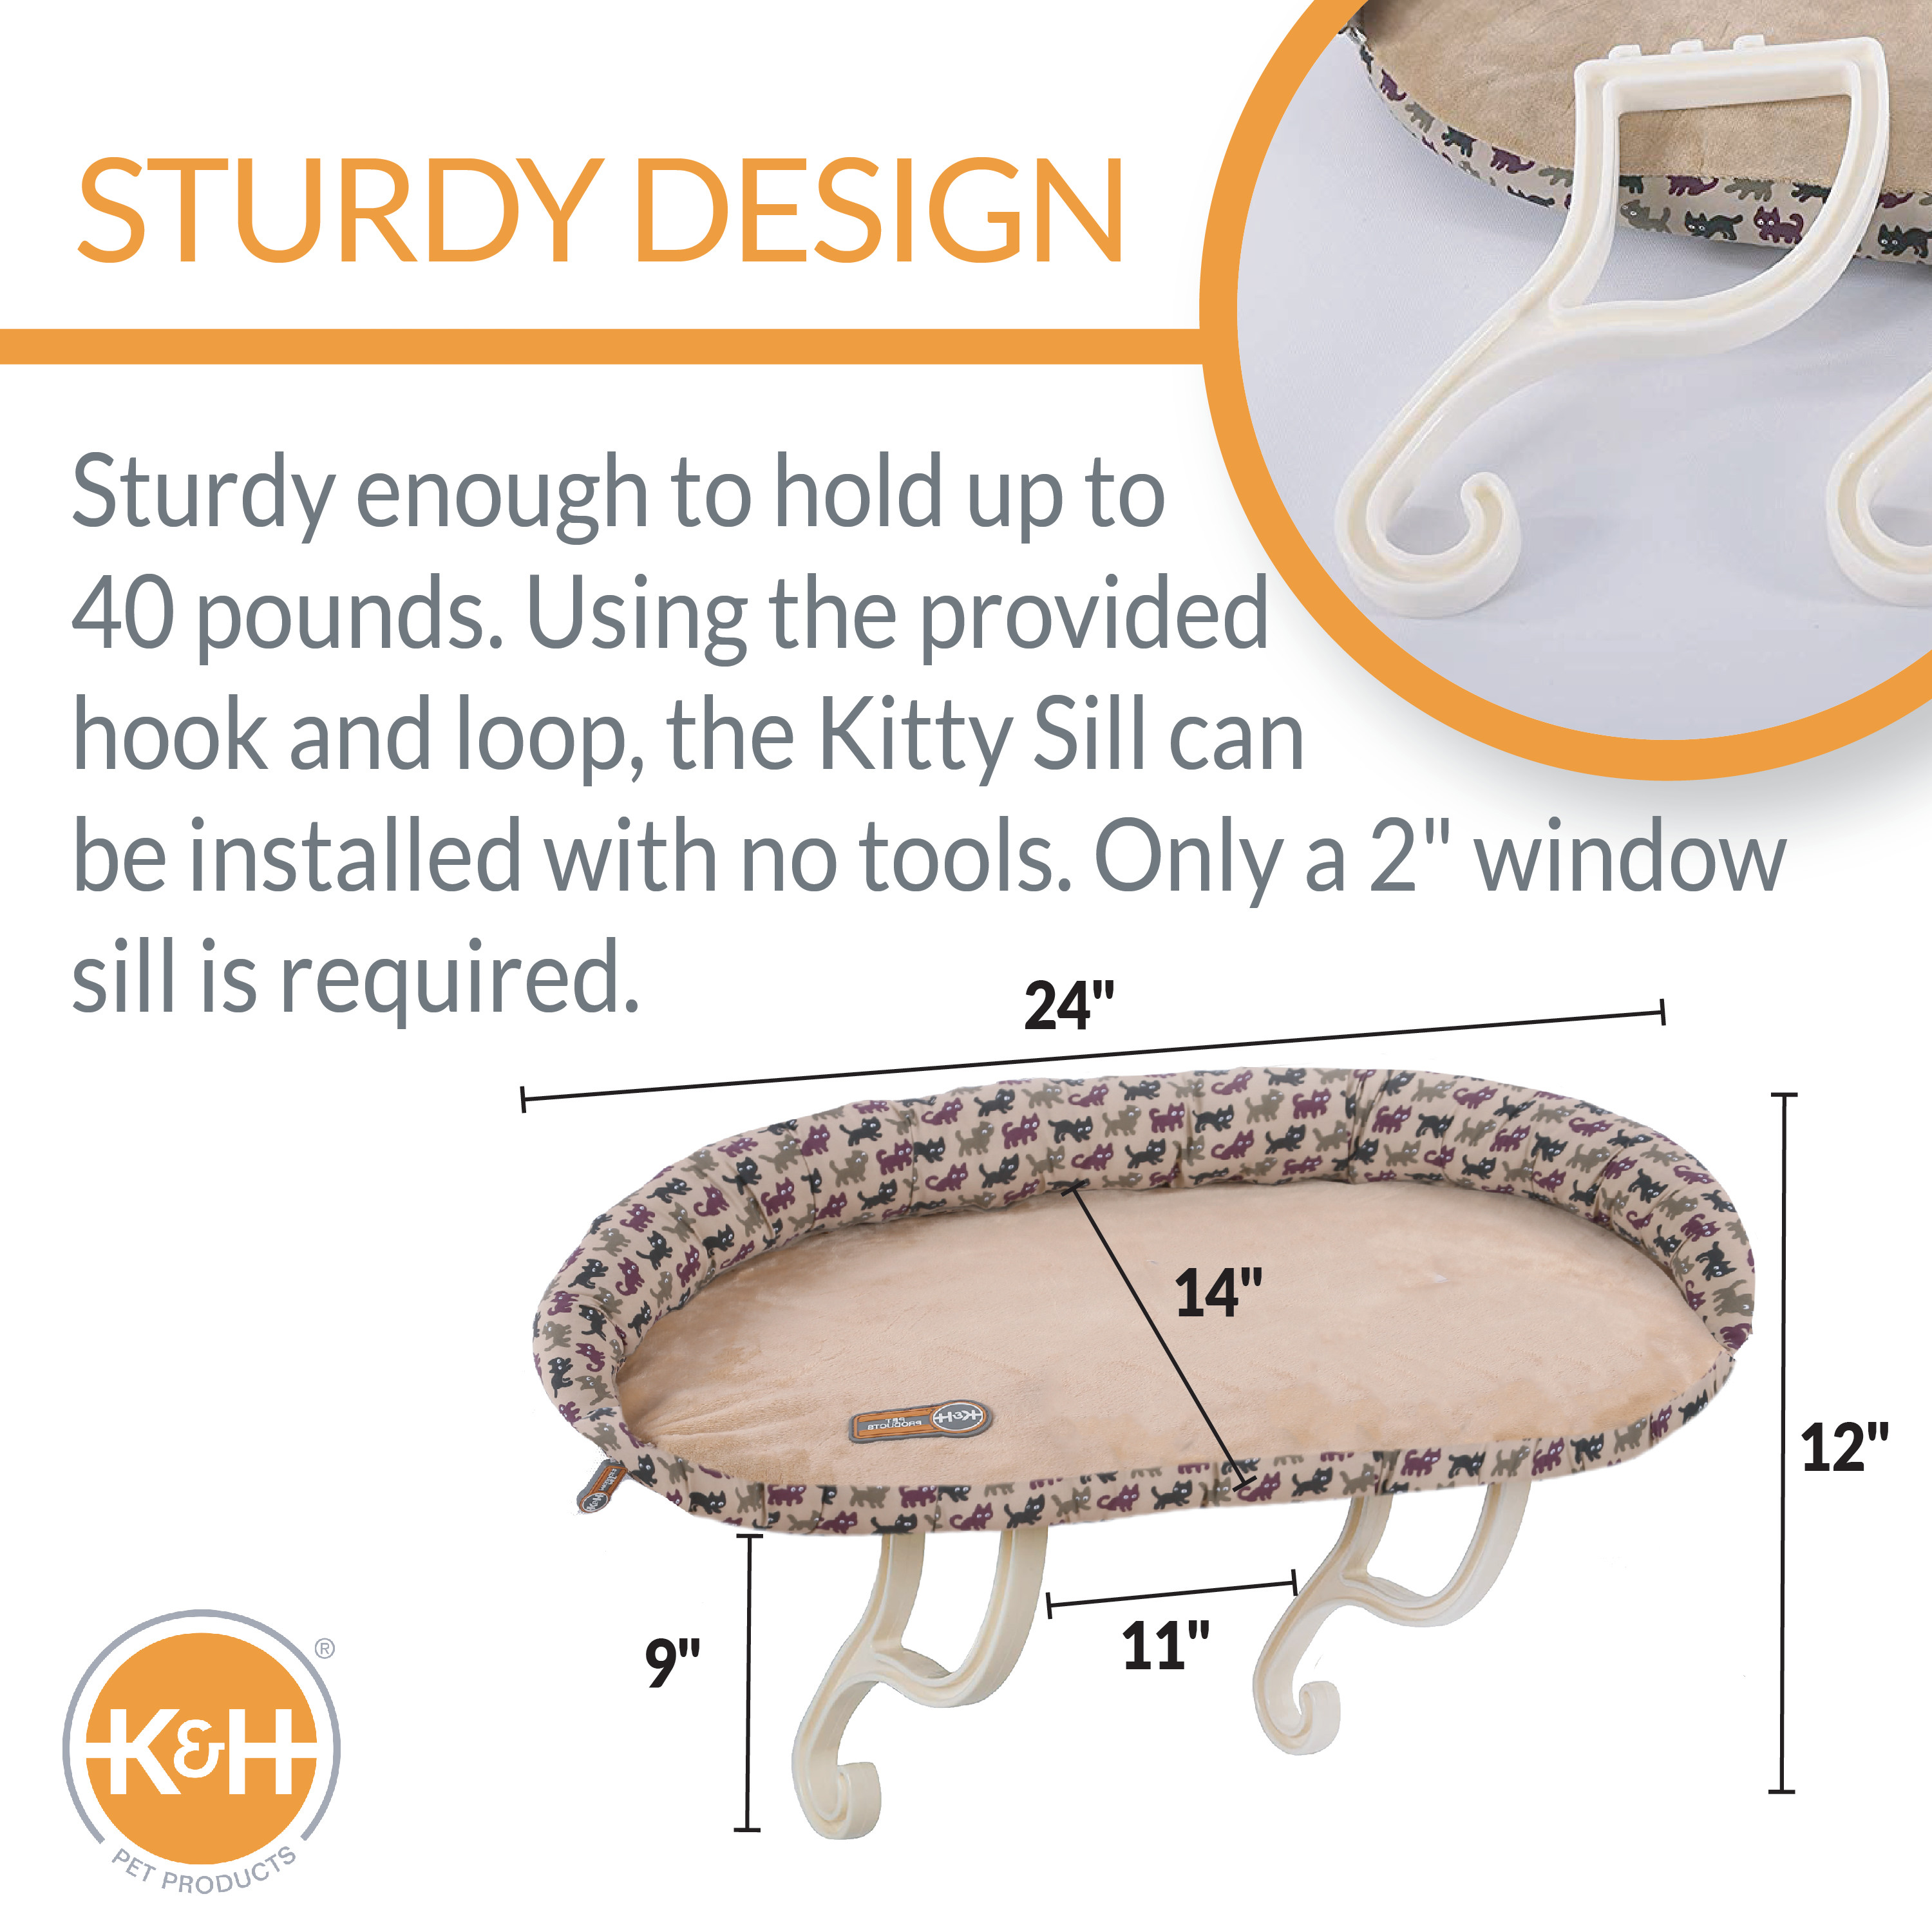 K&H Pet Products Deluxe Kitty Sill with Removable Bolster Tan/Kitty Print 14 X 24 Inches - image 3 of 10